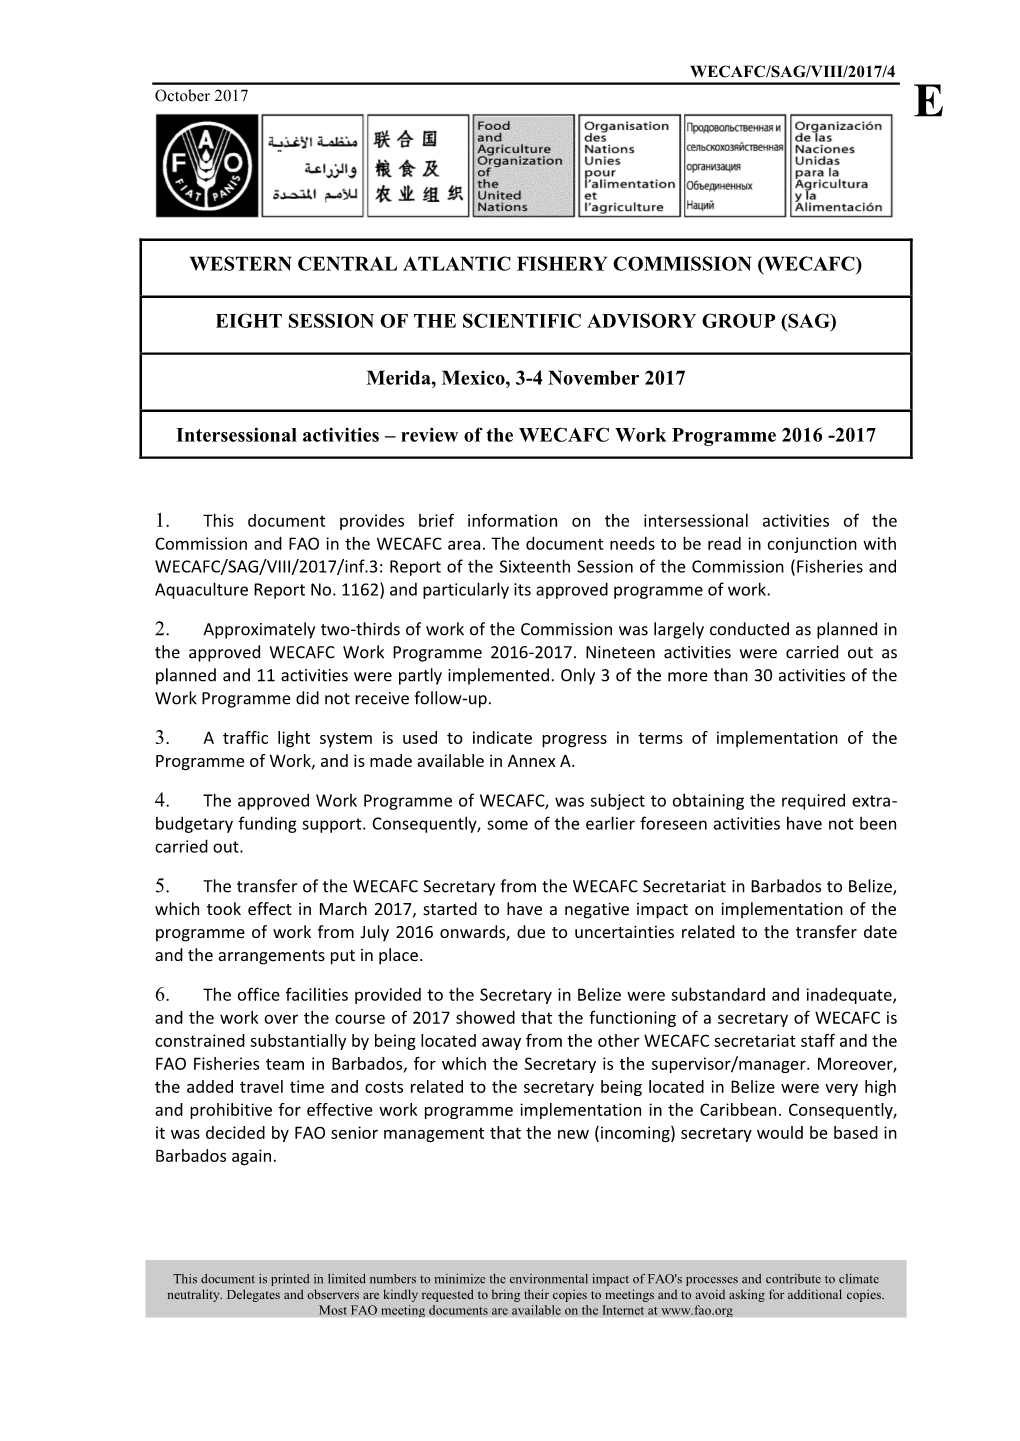 Western Central Atlantic Fishery Commission (Wecafc)